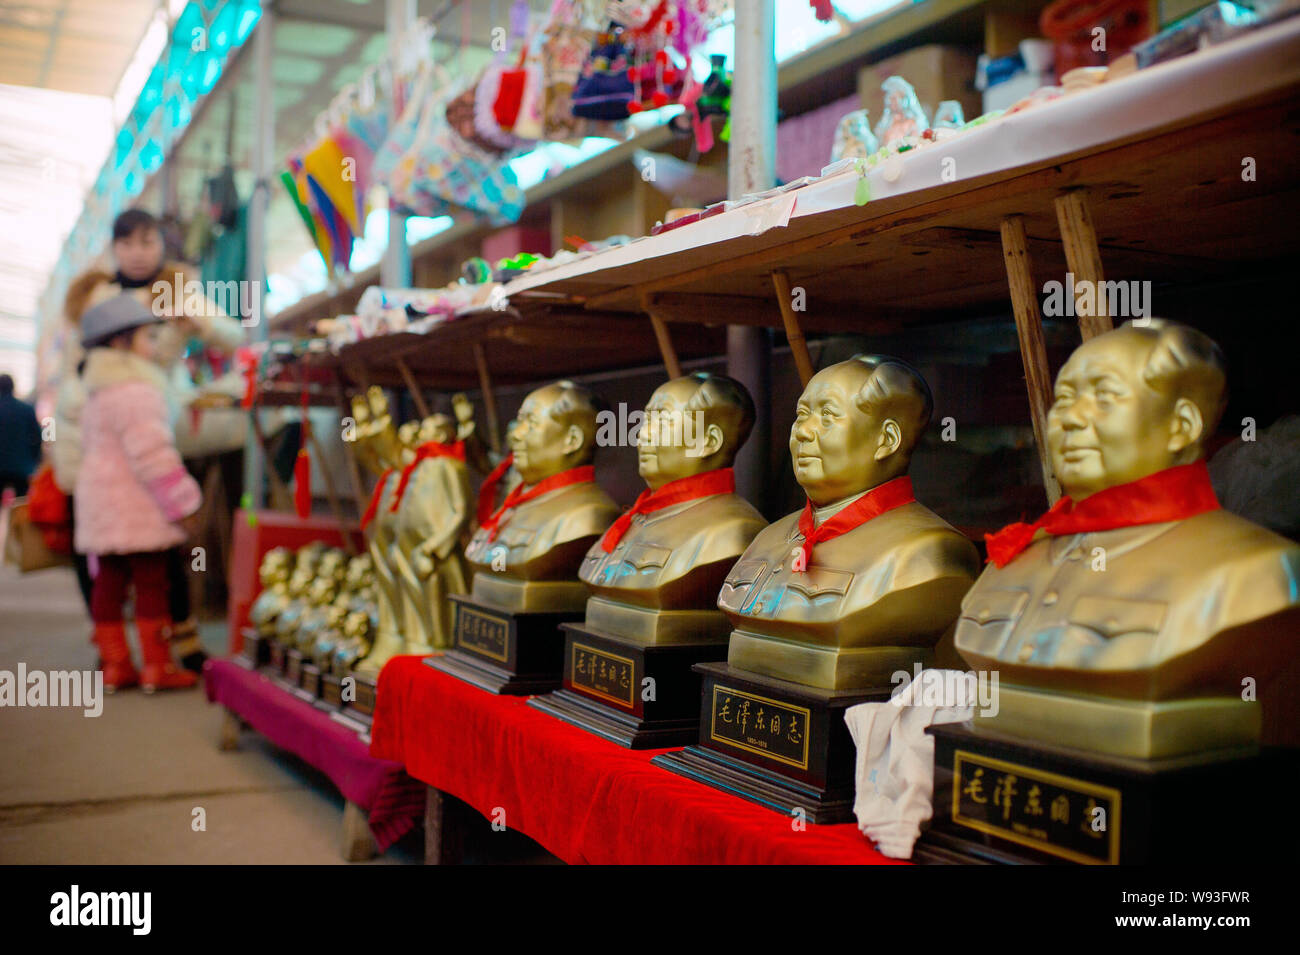 --FILE--Souvenir statues of former Chinese leader Mao Zedong are for sale at a market in Shaoshan, Xiangtan city, central Chinas Hunan province, 14 De Stock Photo